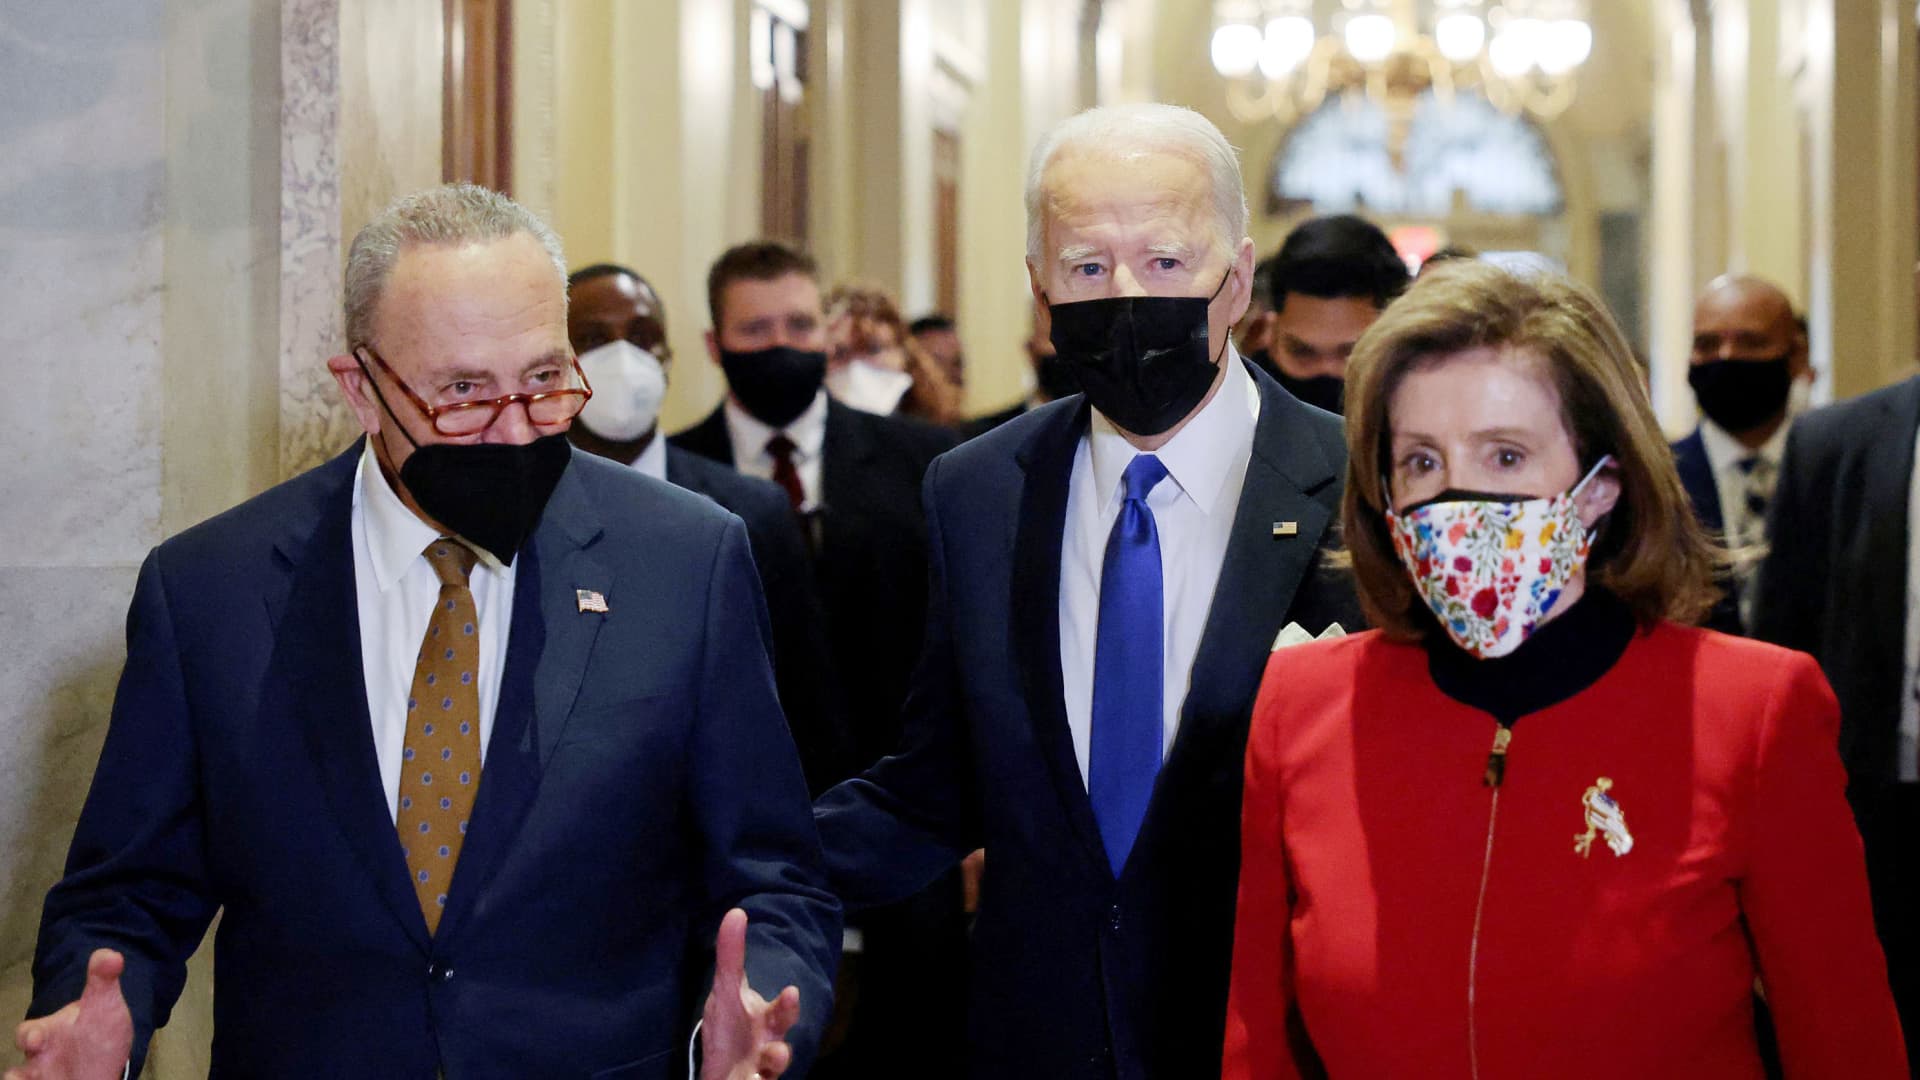 U.S. President Joe Biden is flanked by Senate Majority Leader Chuck Schumer (D-NY) and House Speaker Nancy Pelosi (D-CA) in the Hall of Columns as he arrives to mark the first anniversary of the January 6, 2021 attack on the U.S. Capitol by supporters of former President Donald Trump, on Capitol Hill in Washington, U.S., January 6, 2022.